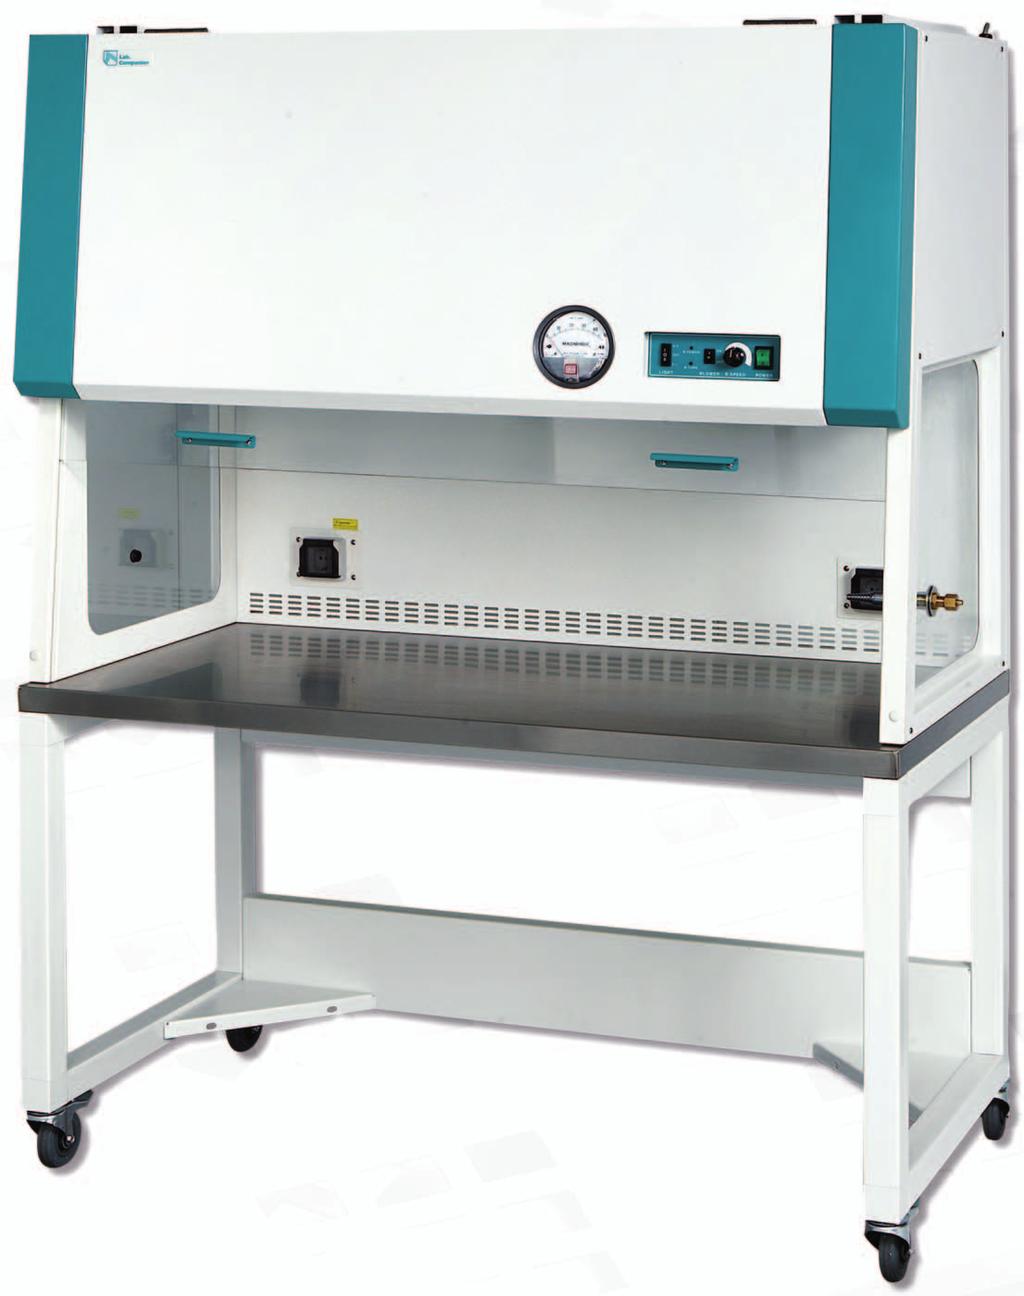 Clean Benches Go to.com Further information on Temperature Chamber products is readily available on our website.